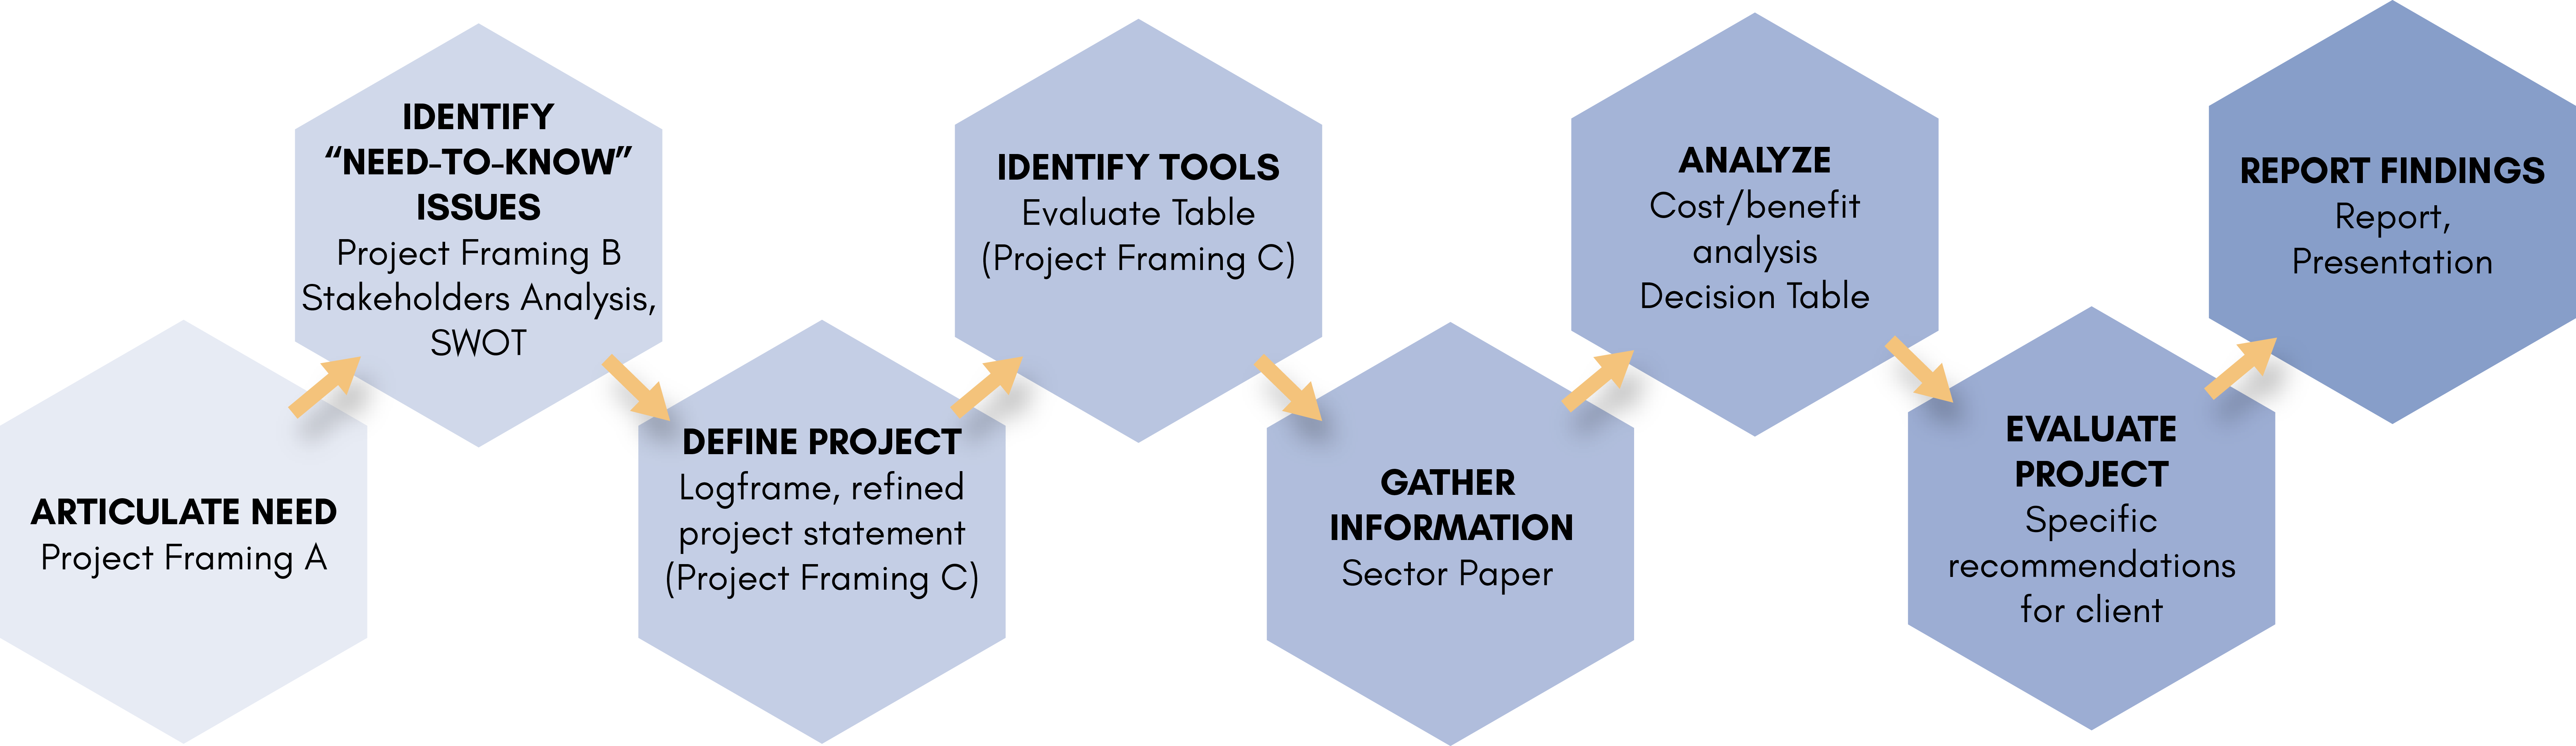 Diagram illustrating the organization of the feasibility studies deliverables 